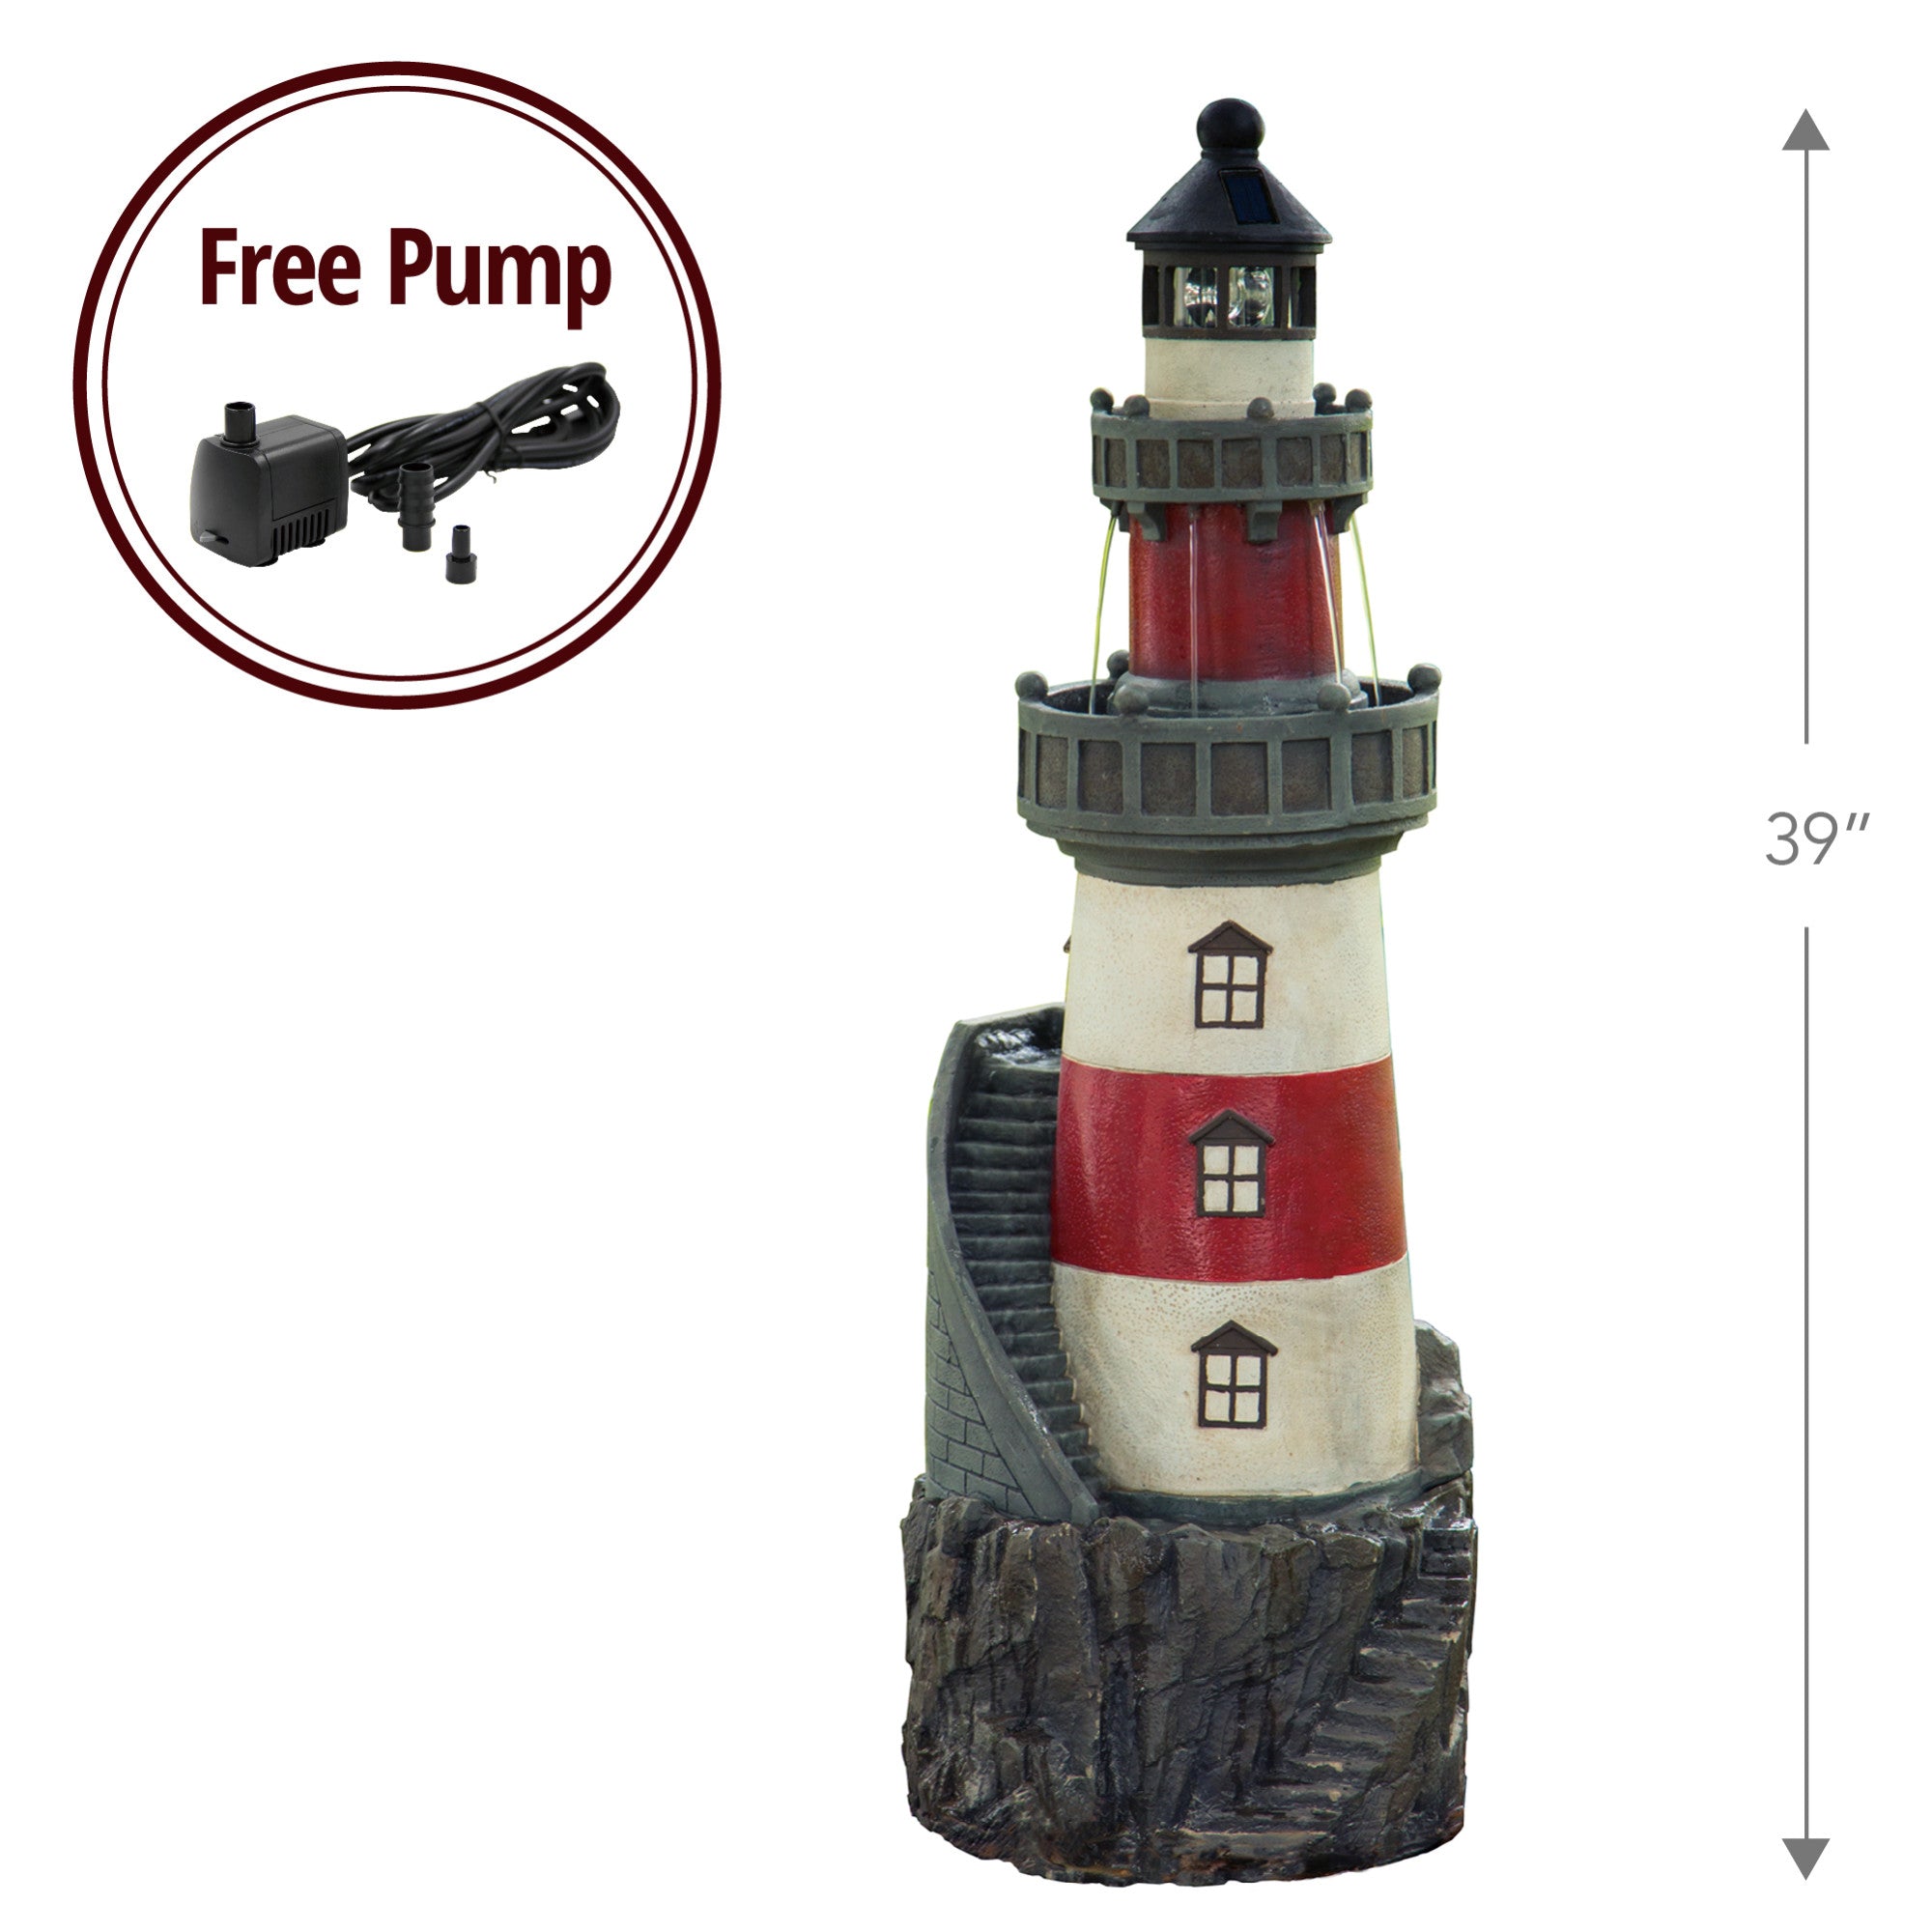 Teamson Home Outdoor Solar Light House Fountain with Rotating LED Light, Red/White